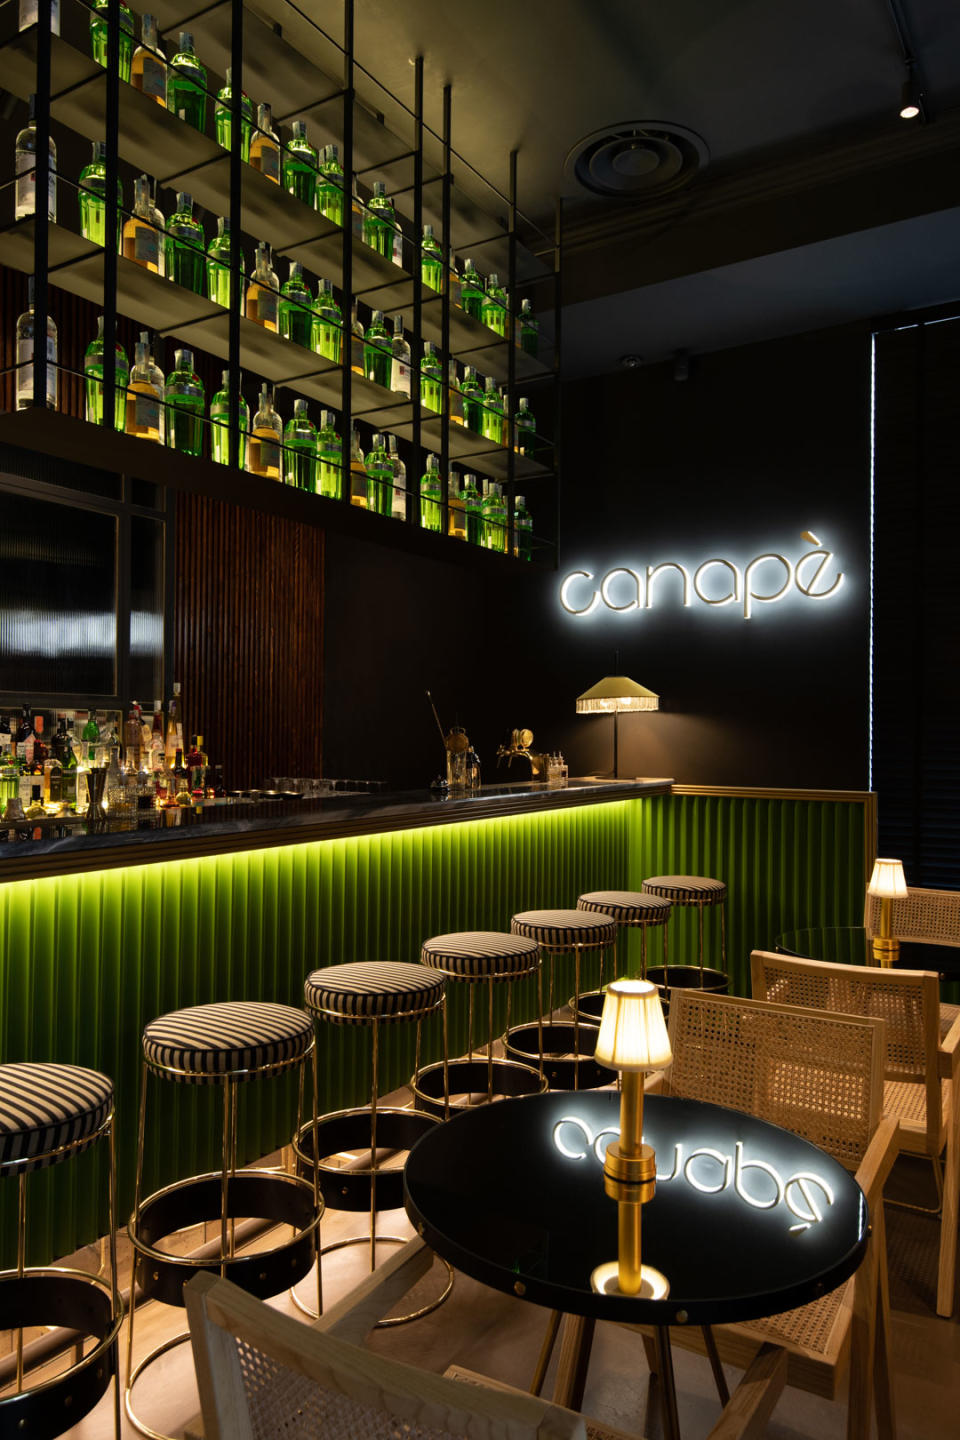 The Canapè bistro and cocktail bar in Milan. - Credit: Giovanni Mocchetti/Courtesy of Canapè